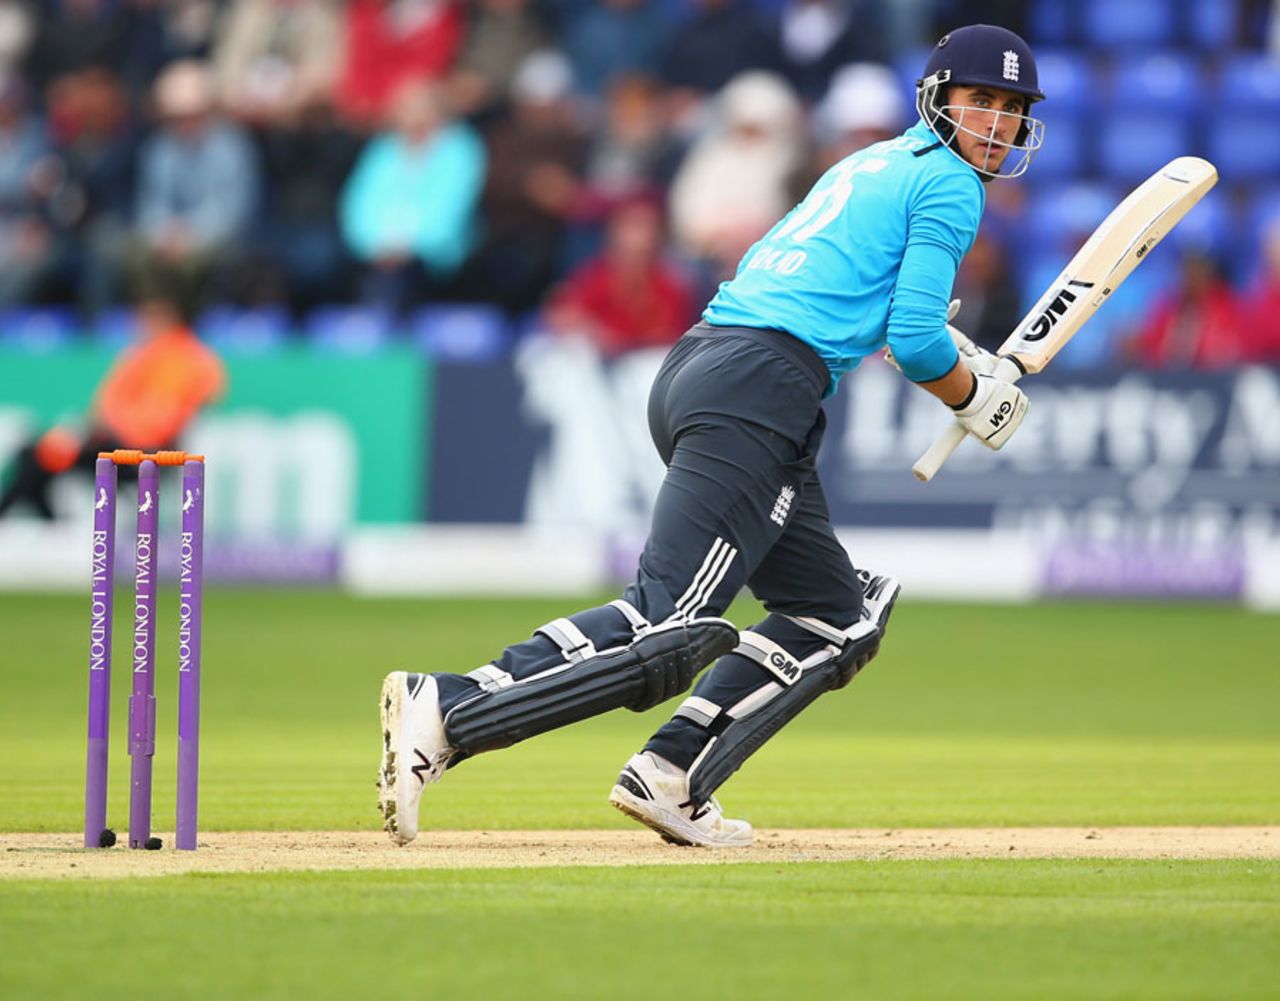 Alex Hales got England's chase off to a bright start, England v India, 2nd ODI, Cardiff, August 27, 2014